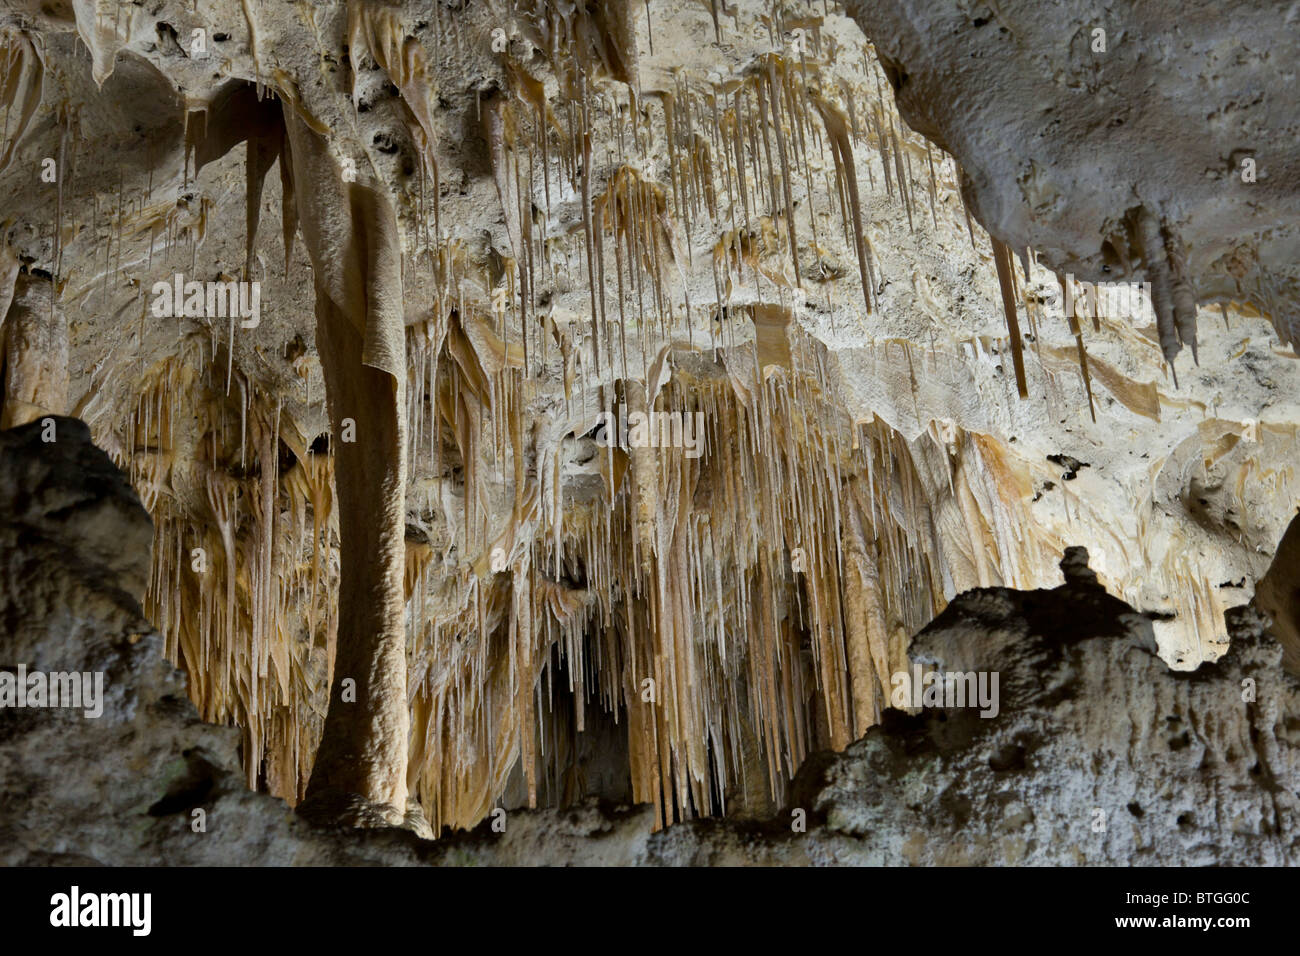 The Painted Grotto in Carlsbad Caverns National Park decorated with calcite speleothems and soda straws. New Mexico, USA. Stock Photo